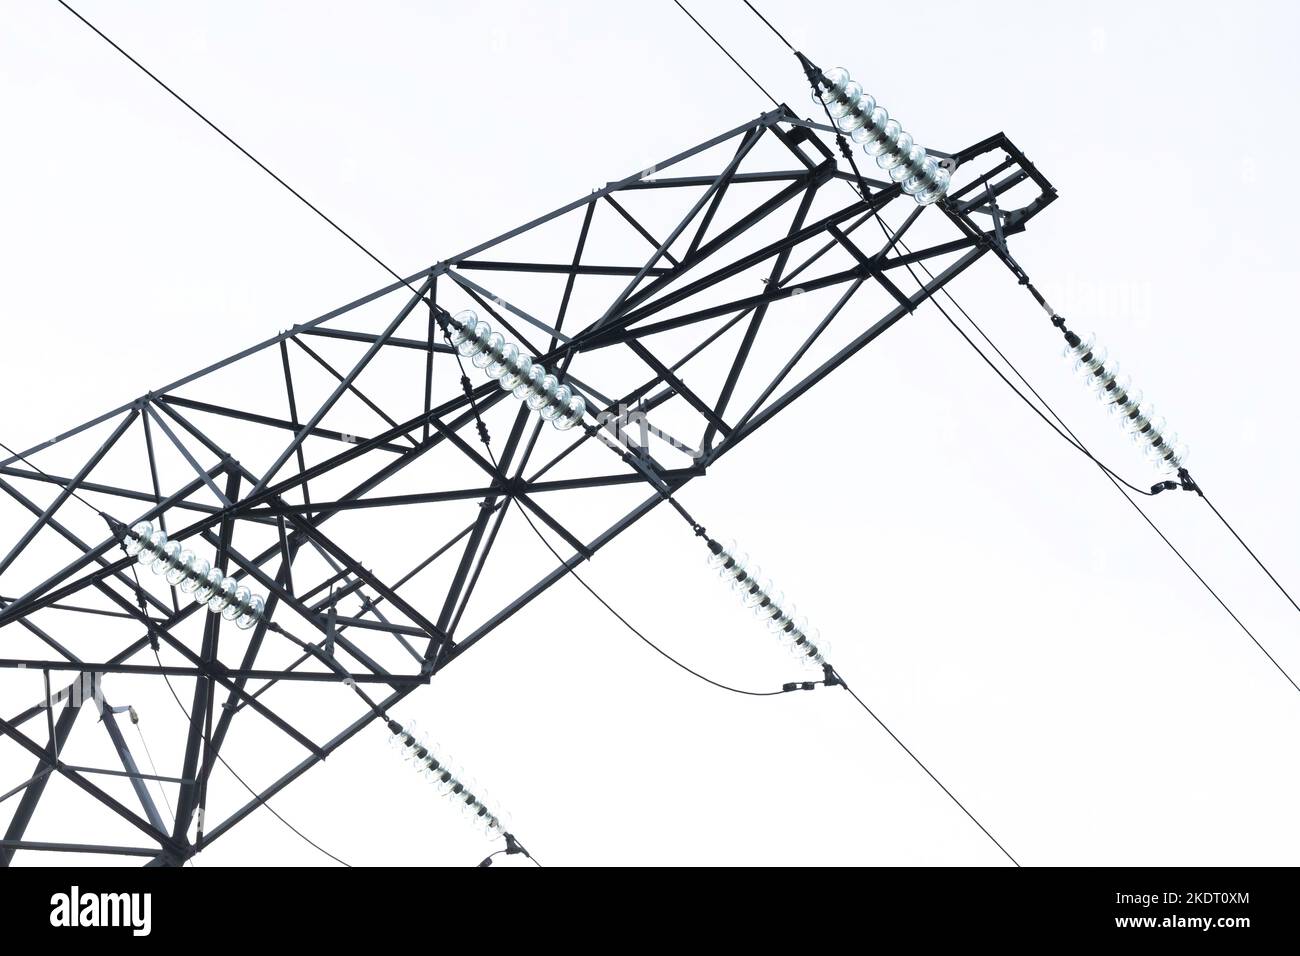 High-voltage power pylon, cables are attached for the transport of large amounts of electrical energy over relatively large distances. On white Stock Photo